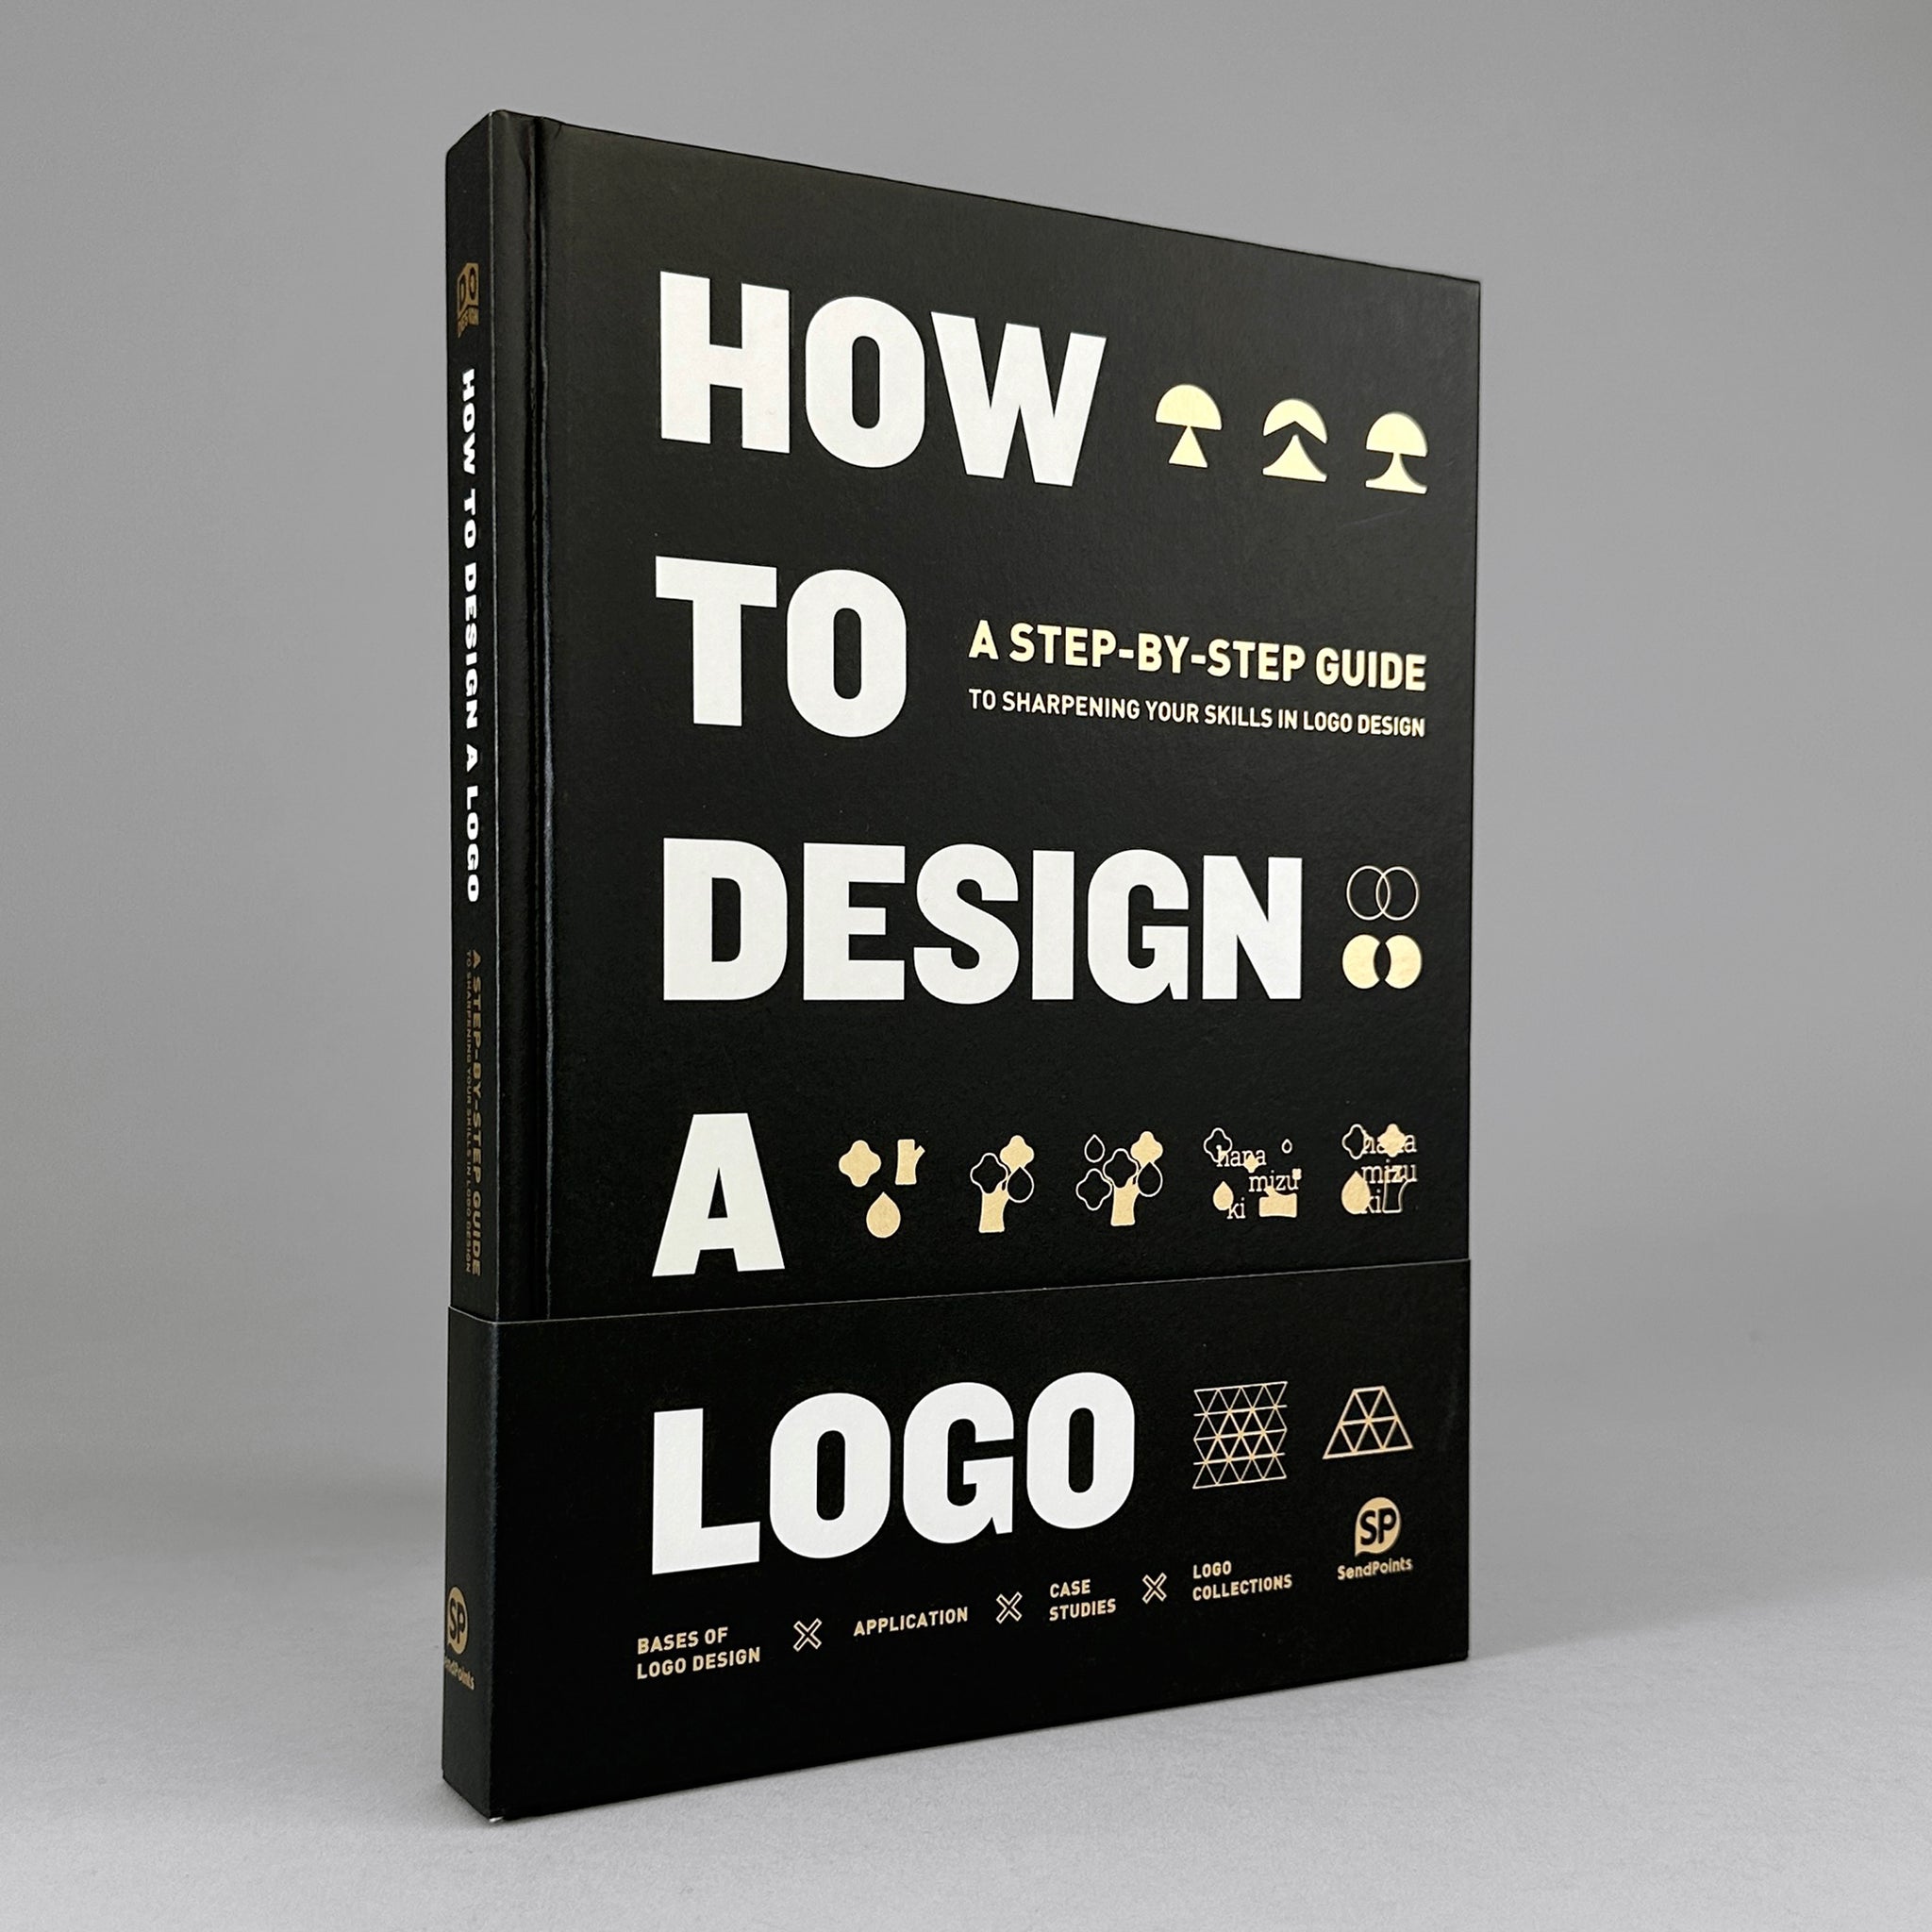 How to Design a Logo: A Step-by-Step Guide